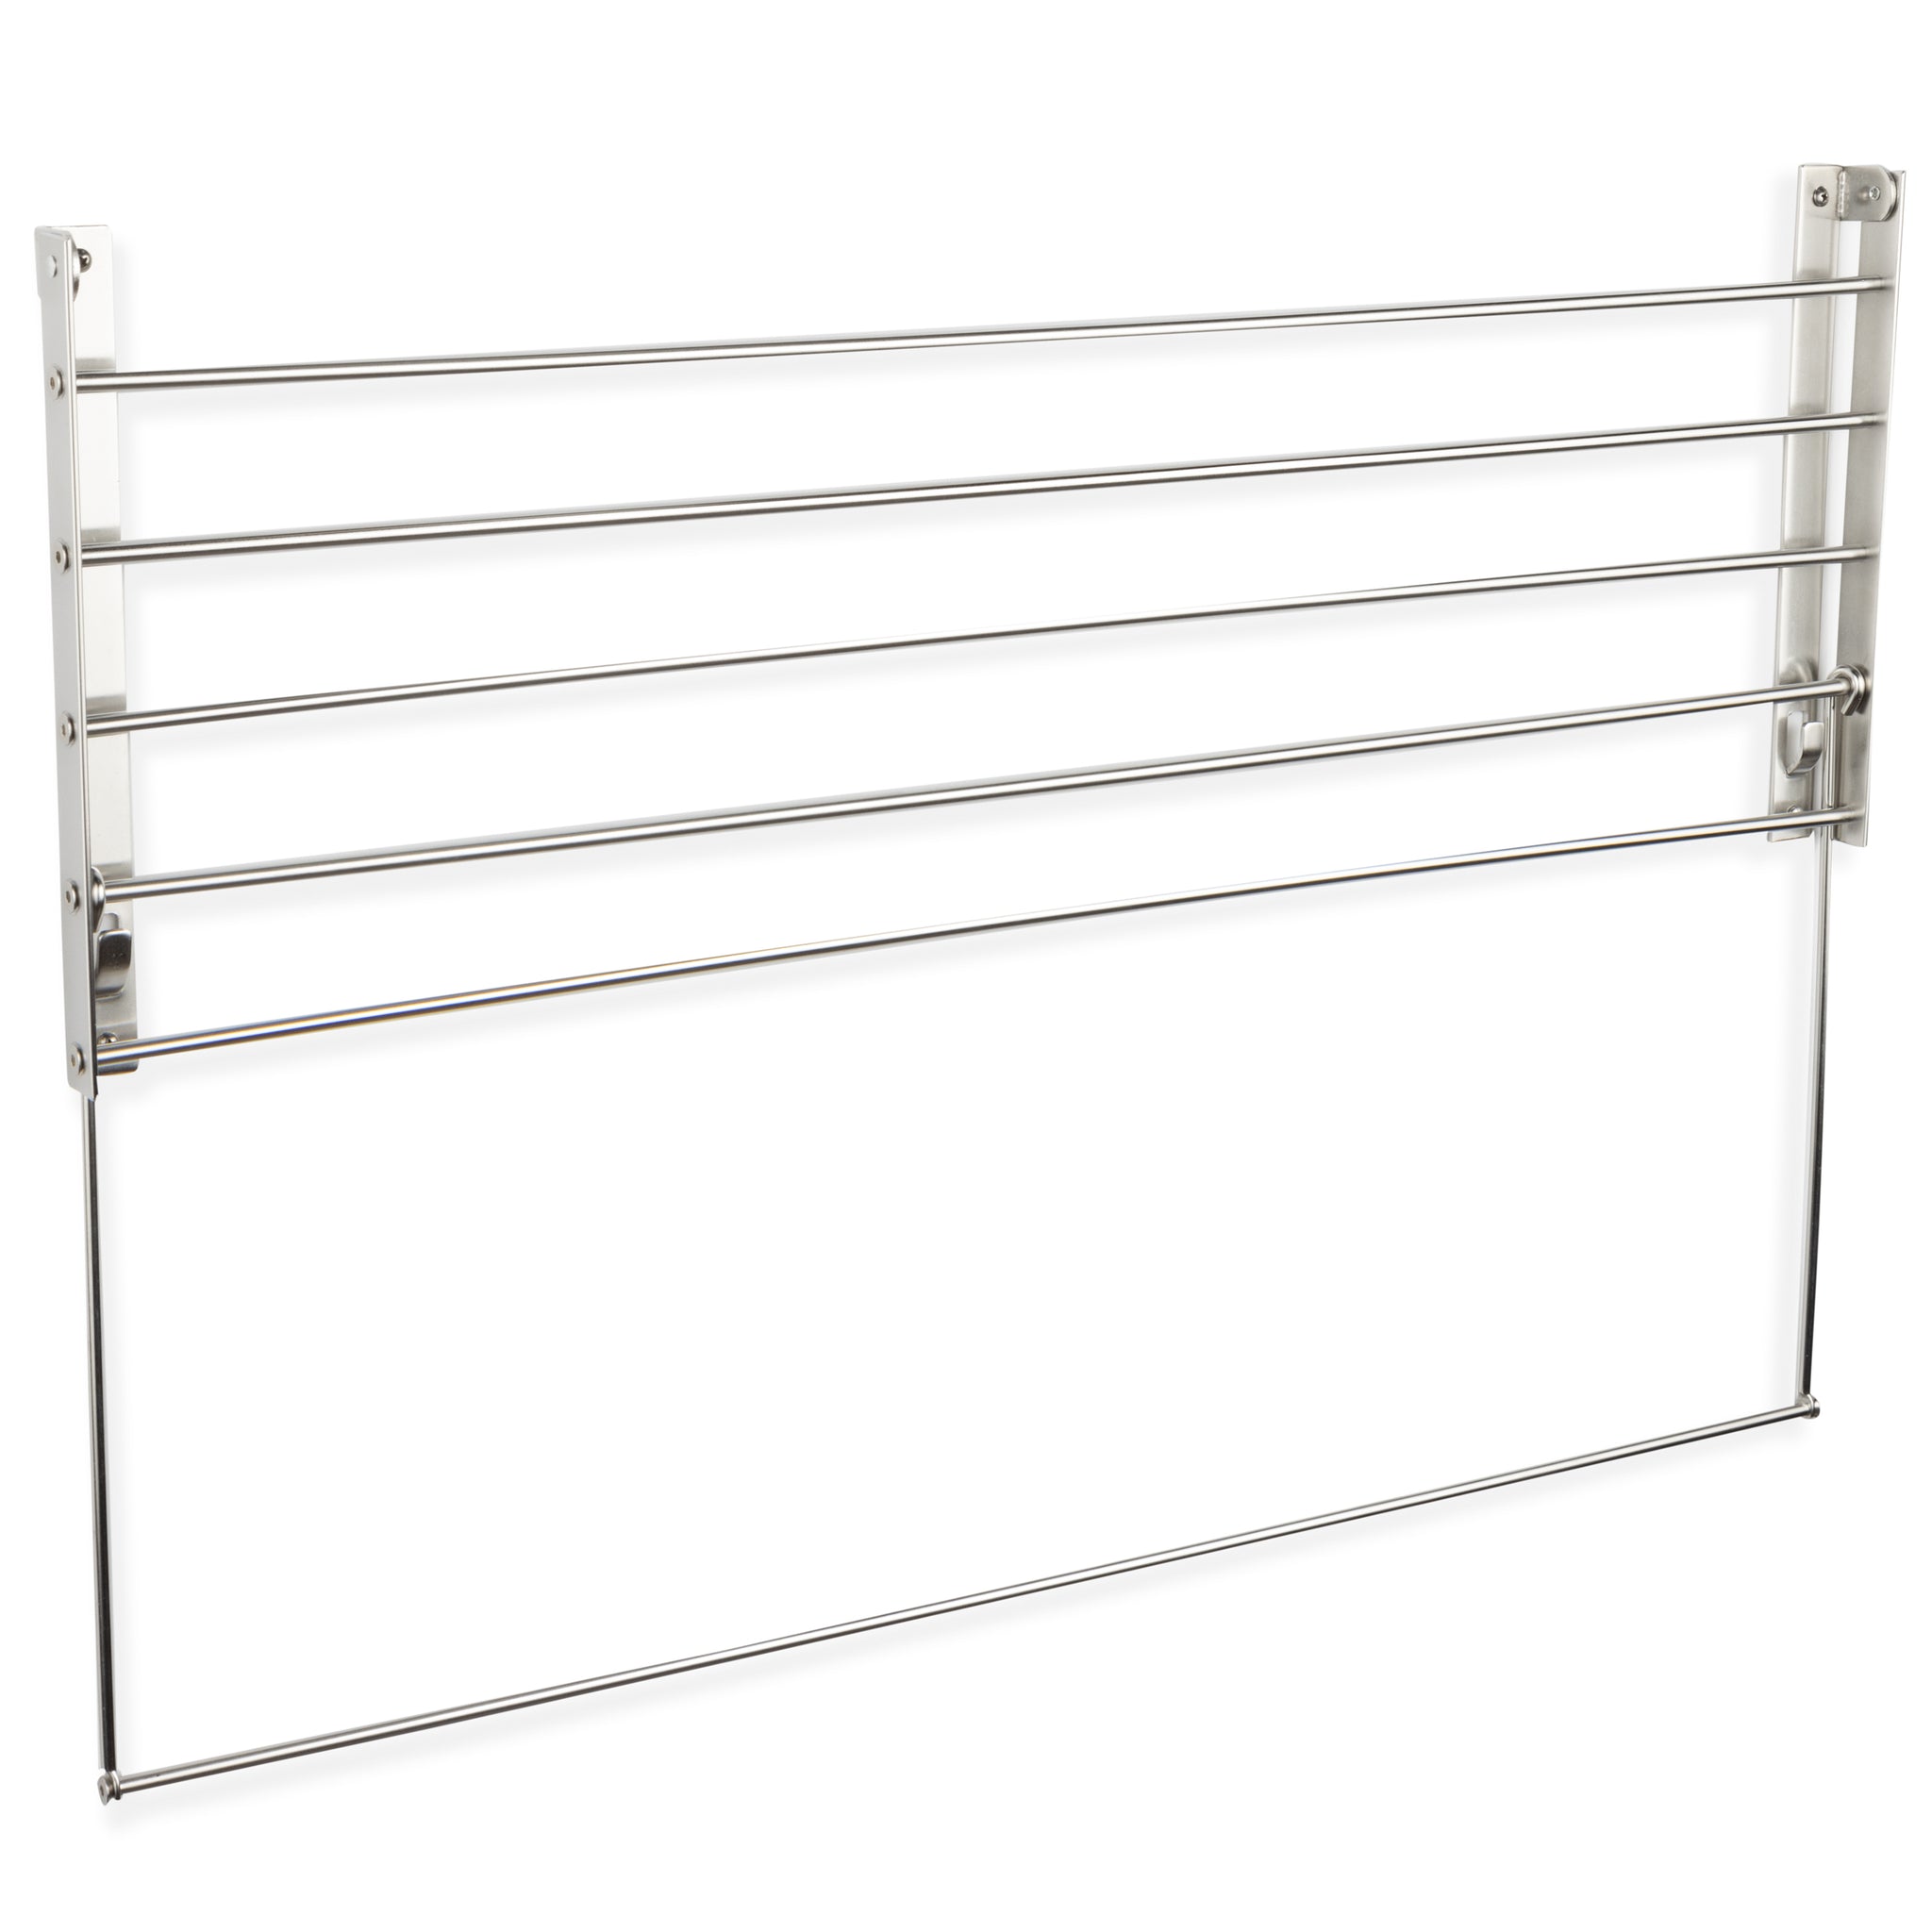 Cole-Parmer Modular Stainless Steel Drying Rack, 50 White Pegs | Cole-Parmer